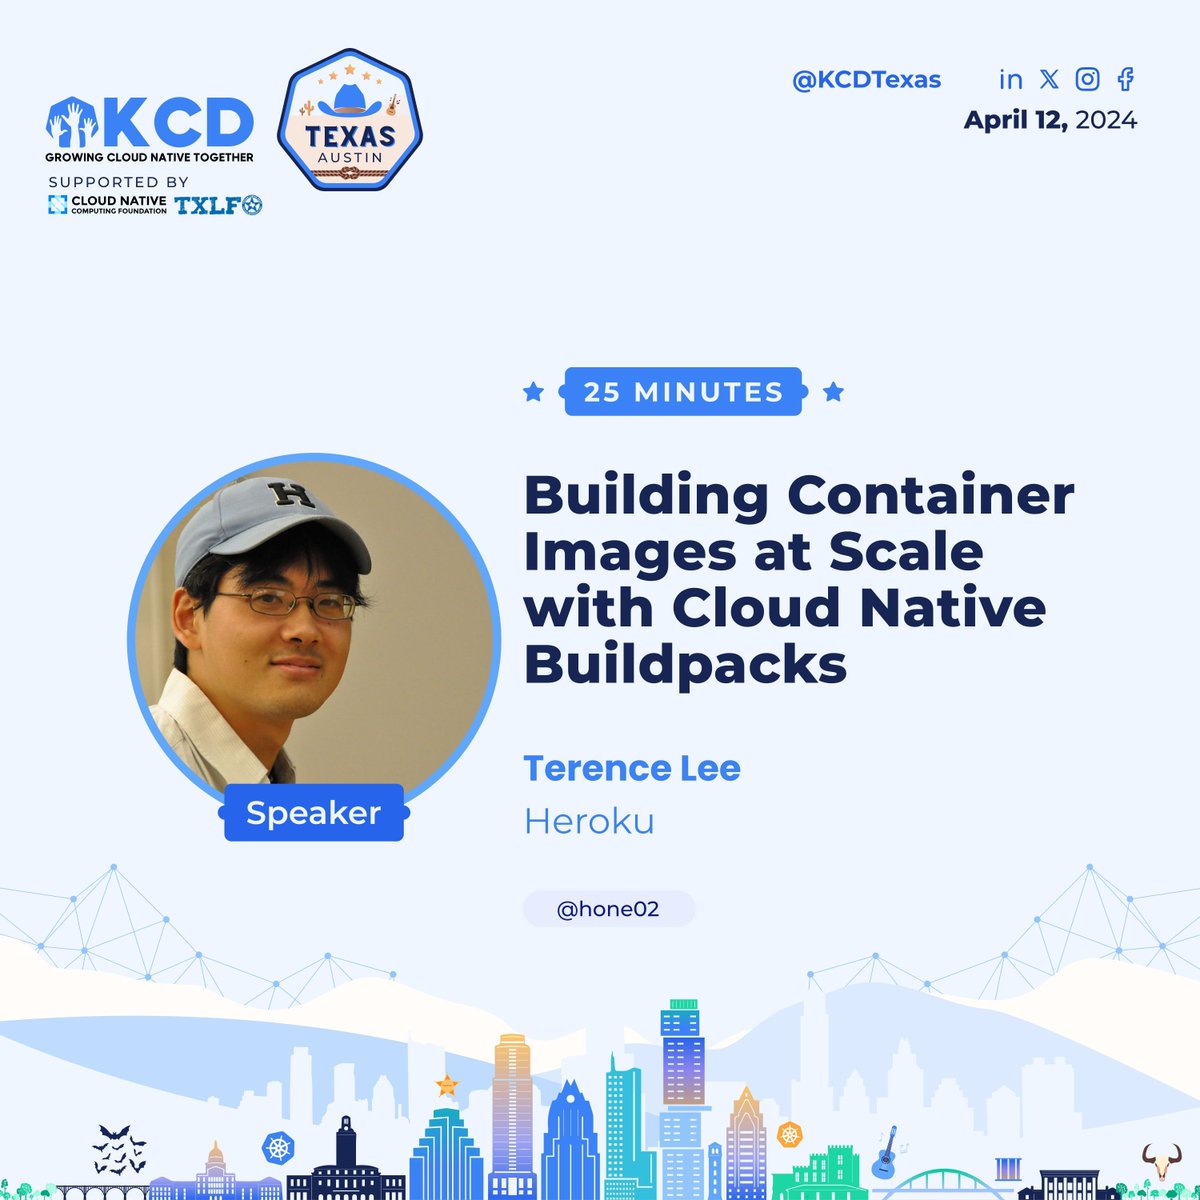 🏗️ Scale up with Terence Lee at #KCDTexas as he unpacks building container images with Cloud Native Buildpacks. Perfect your Kubernetes deployments! 📈 Catch this essential session 🔗 texaskcd.com #KCD #TeamCloudNative #CNCF #TXLF #ATX #Kubernetes #CNCF